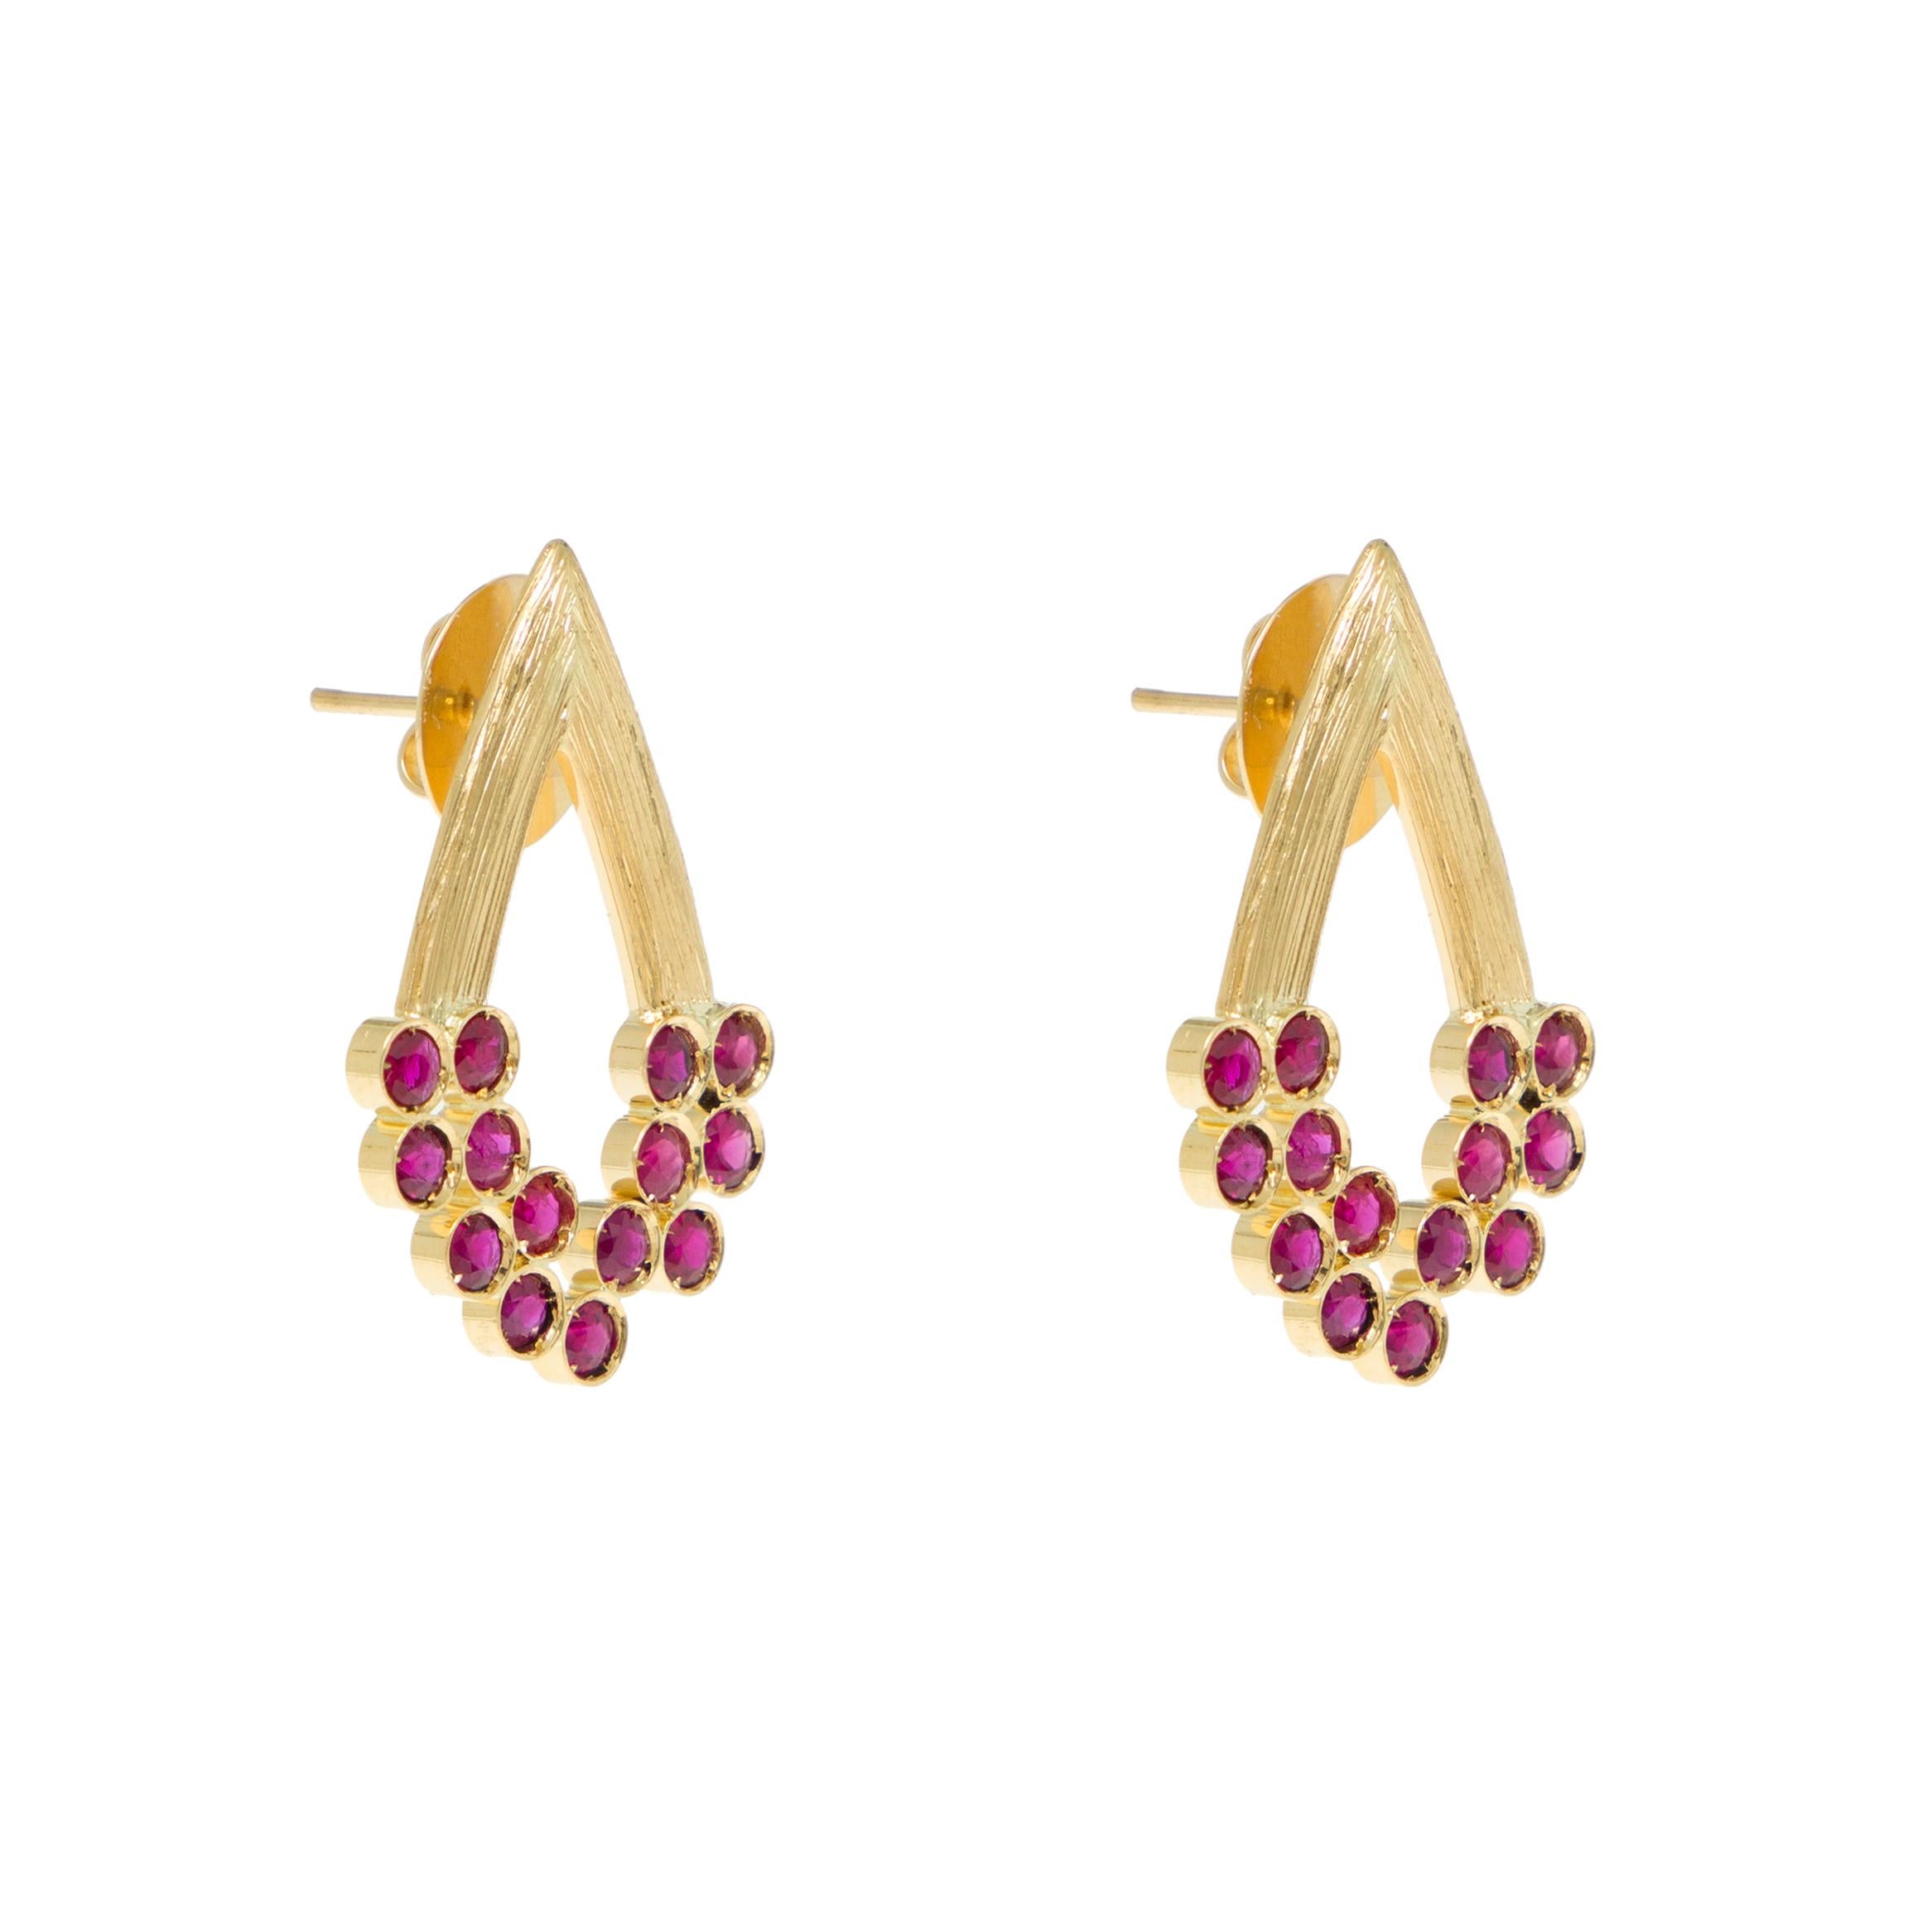 Earrings
Gold 18K 
Ruby
Handmade, polished finish and bezel setting

They say the composition of Van Gogh’s painting “Poppy Field” is highly reminiscent of those in Monet’s painting of the same subject.  The round and faceted rubies resemble the red